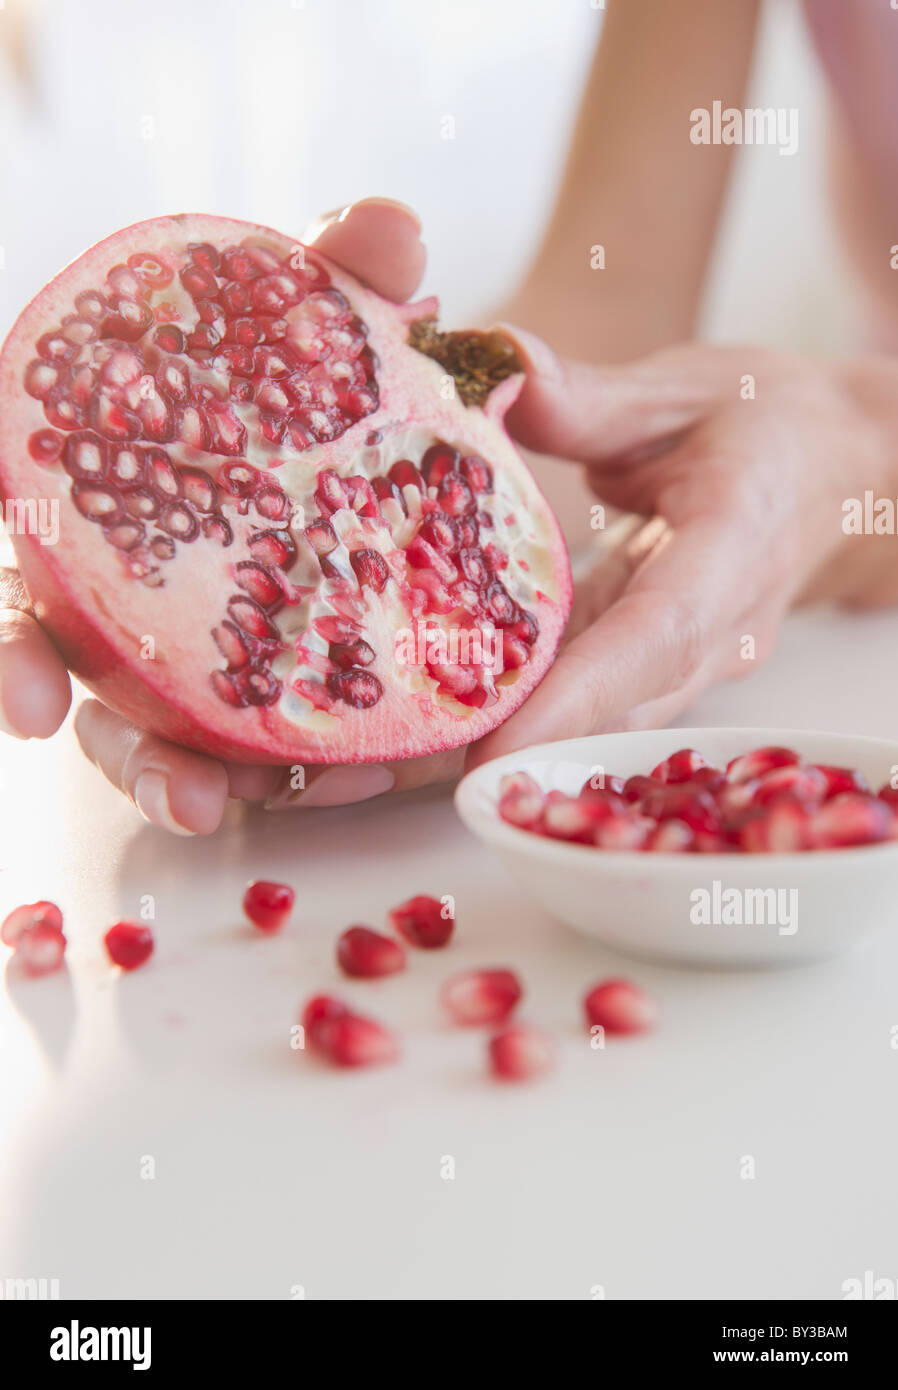 USA, New Jersey, Jersey City, Womans hand with pomegranate cross-section Stock Photo